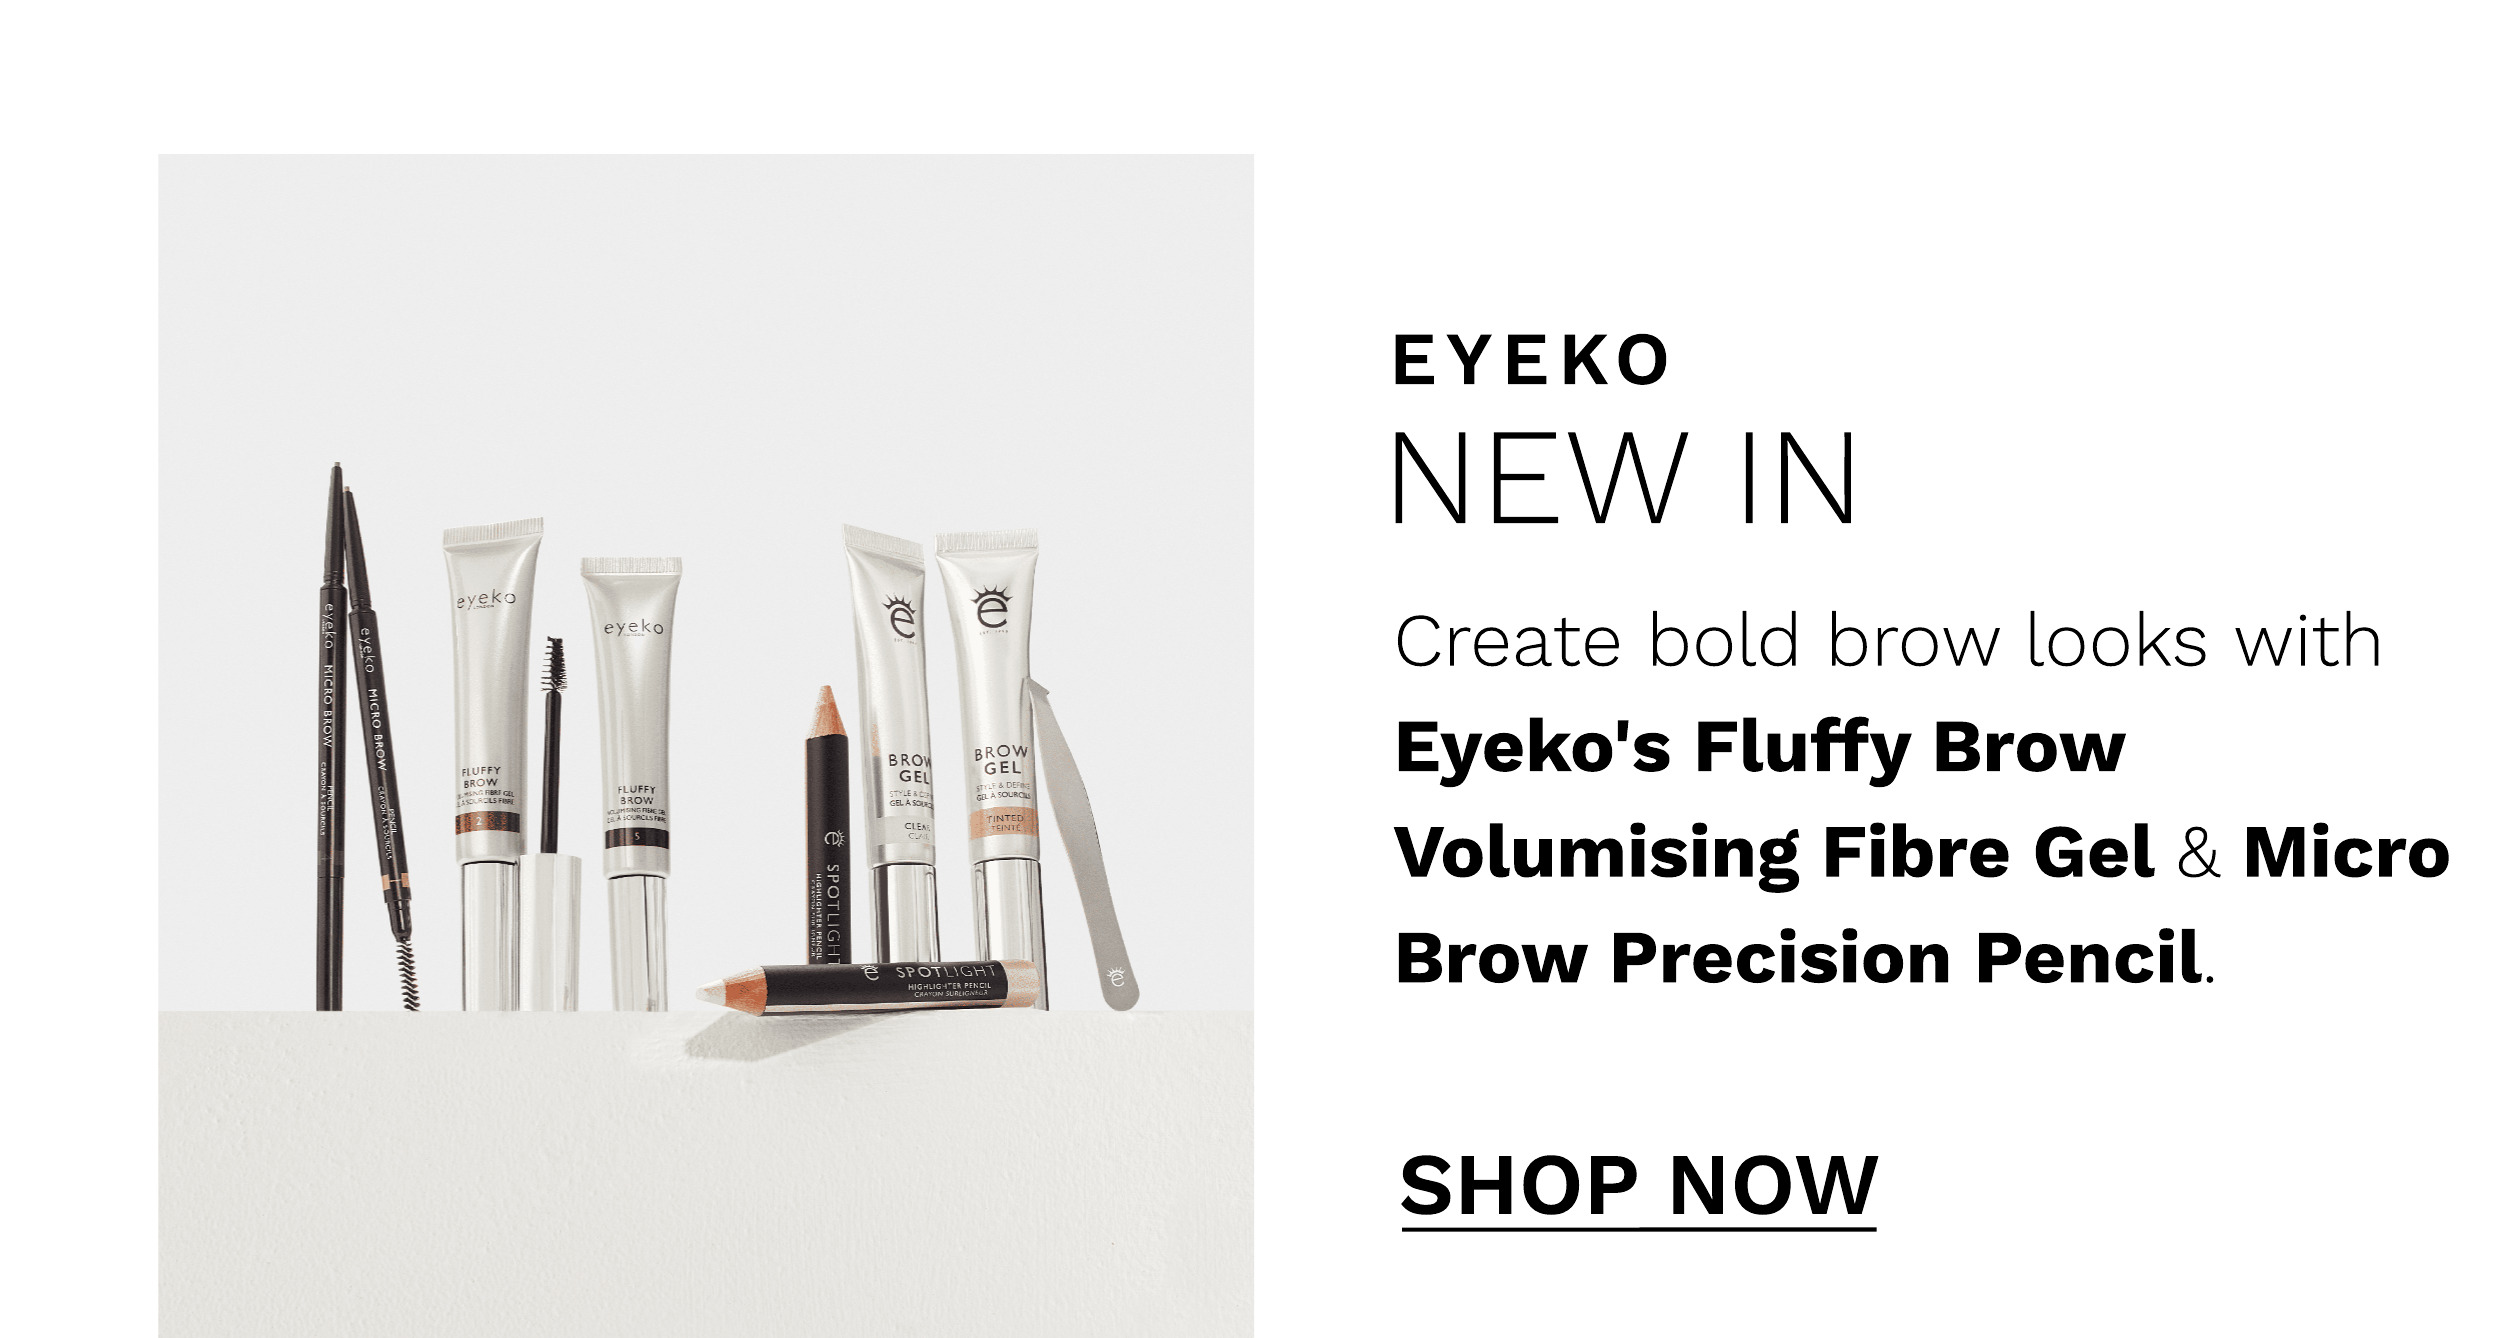  EYEKO NEW IN Create bold brow looks with Eyeko's Fluffy Brow Volumising Fibre Gel Micro Brow Precision Pencil. SHOP NOW 